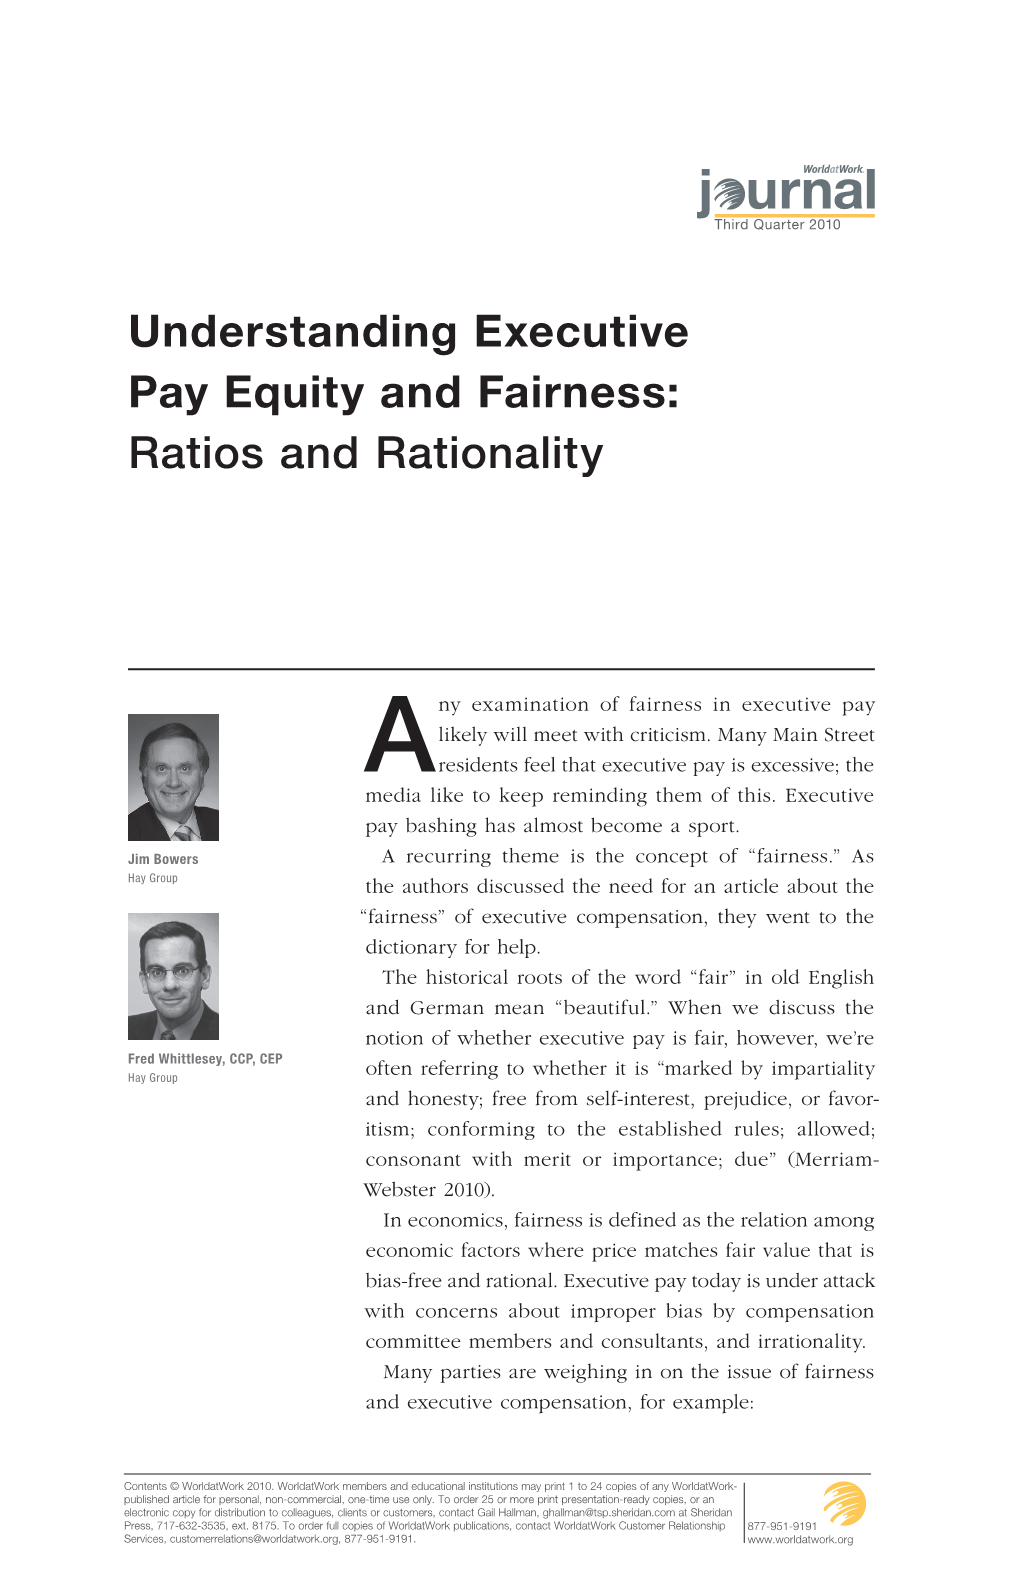 Understanding Executive Pay Equity and Fairness: Ratios and Rationality